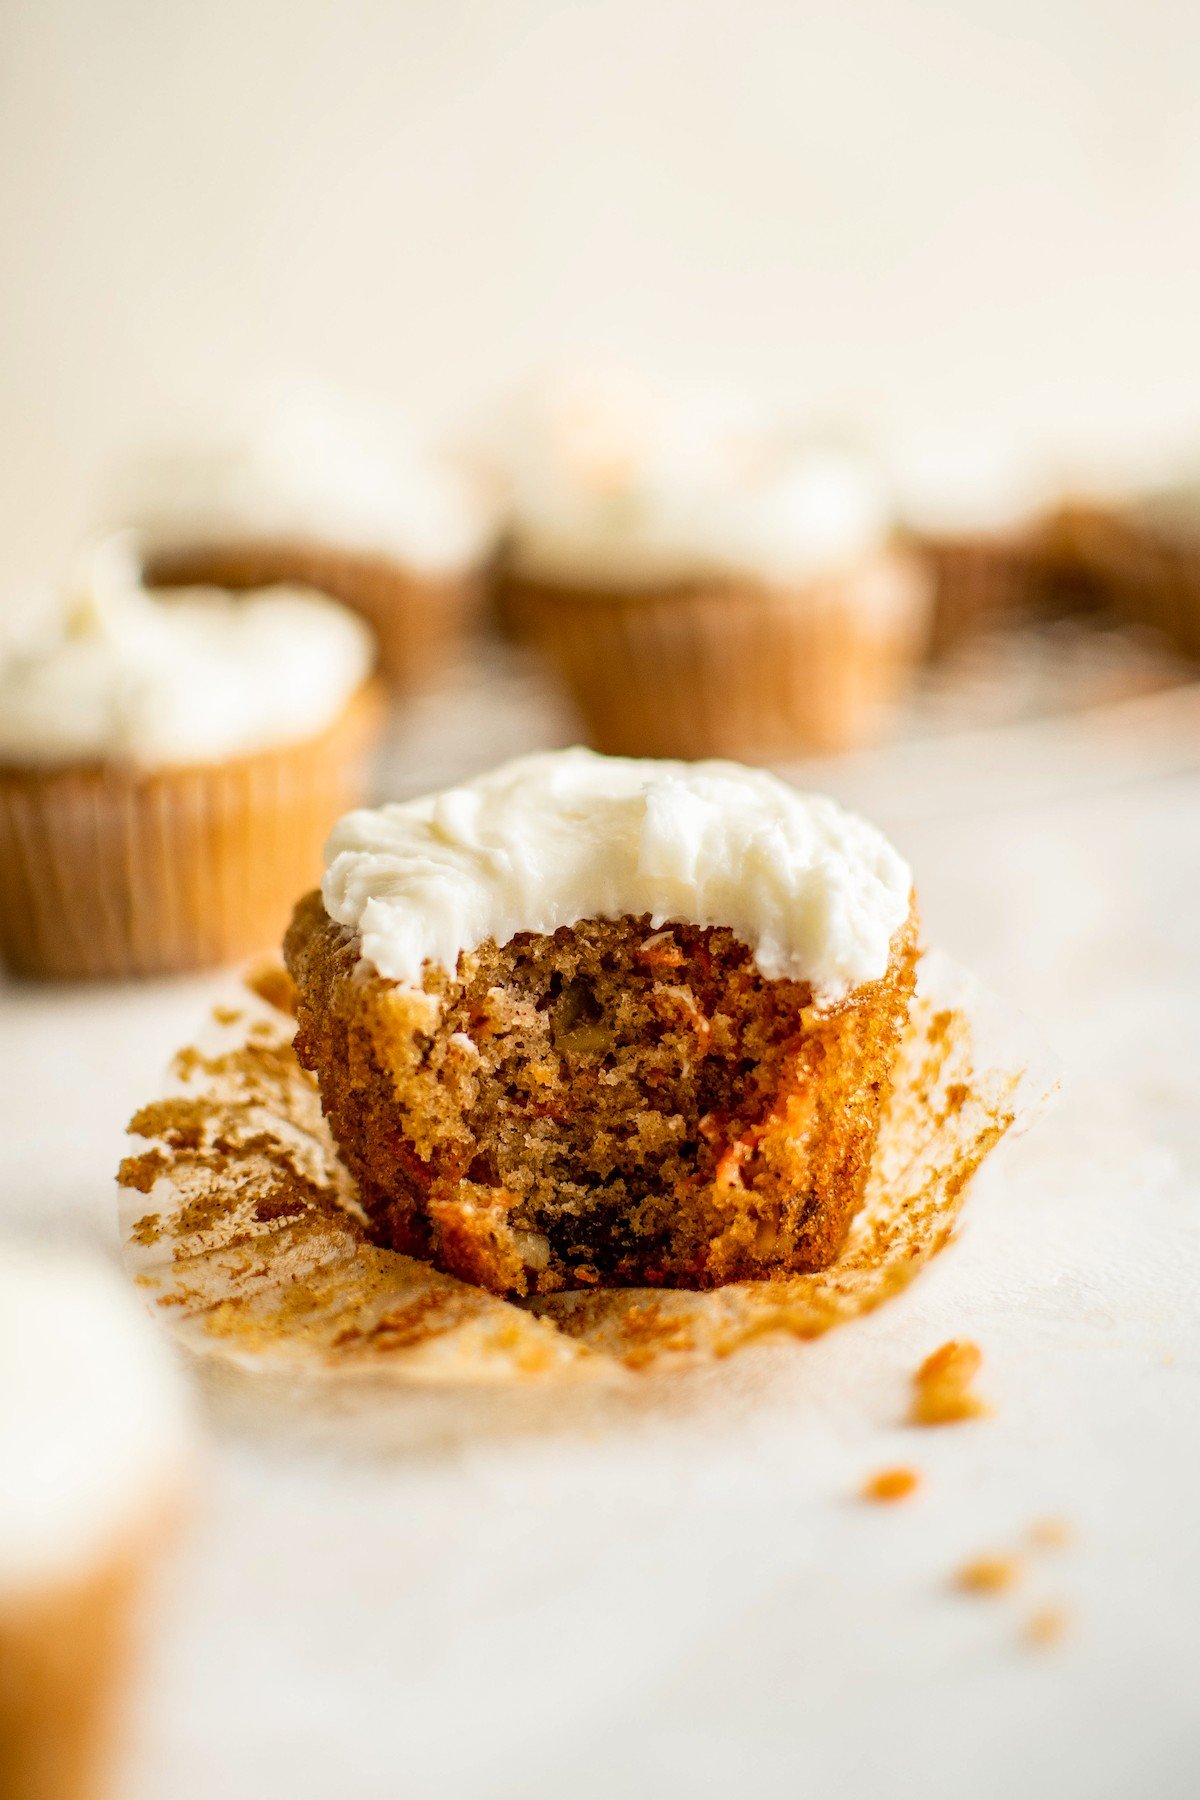 A carrot cupcake with a bite taken out of it.